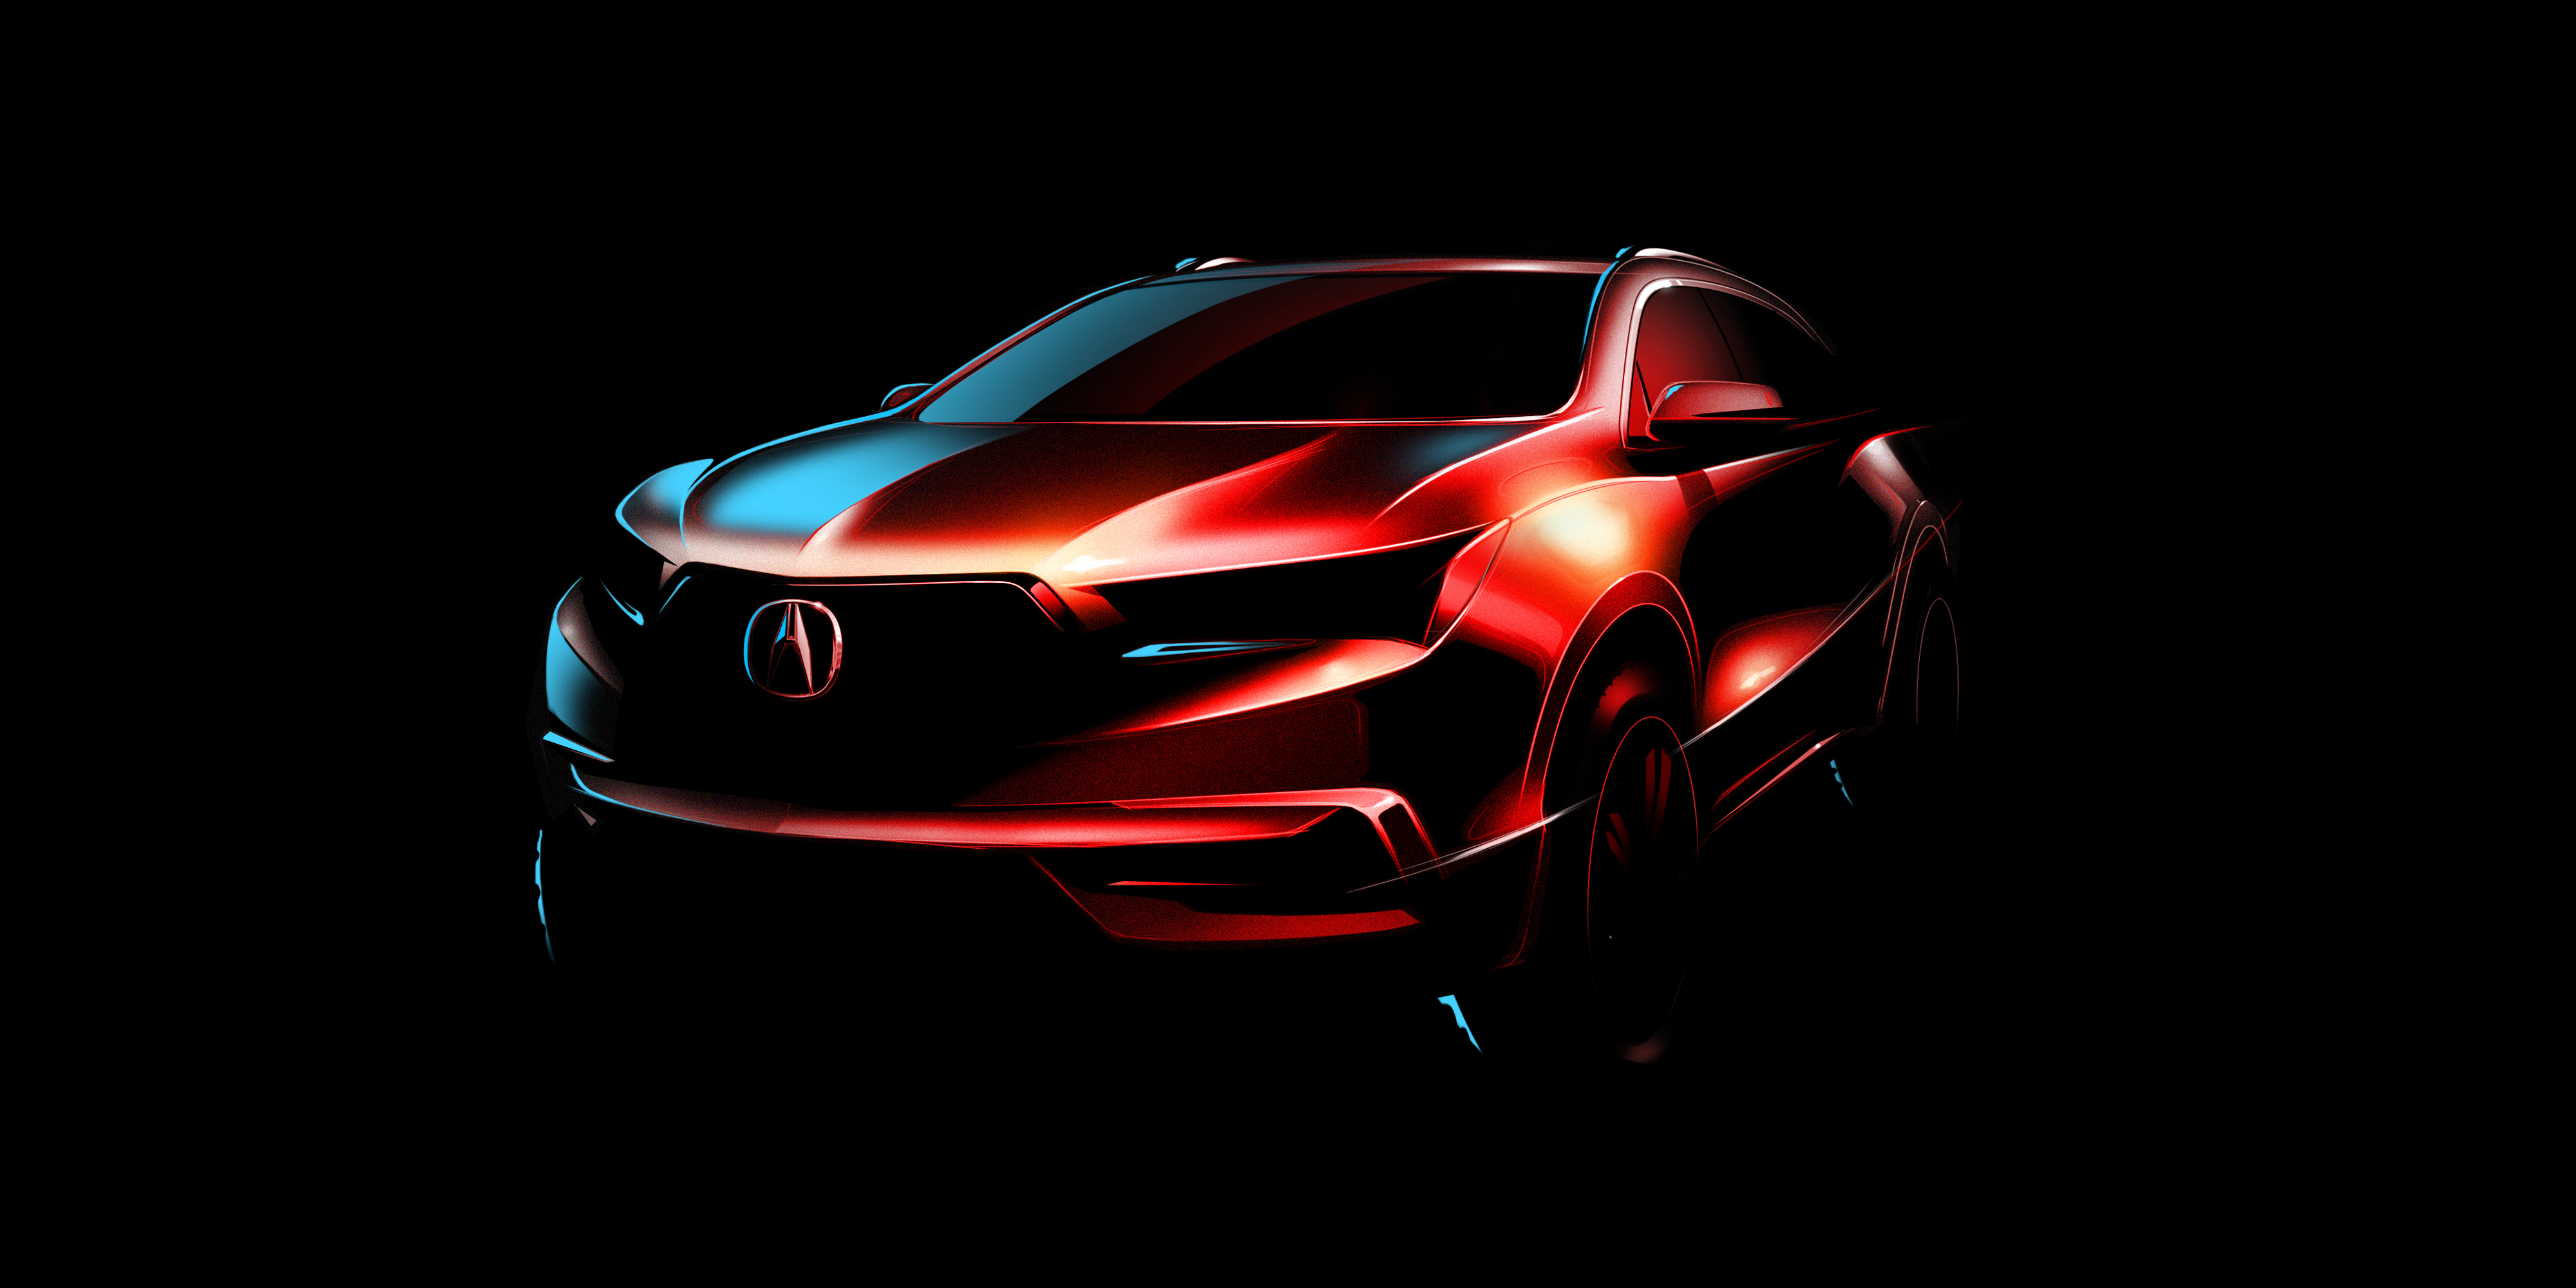 Acura to unveil new MDX at New York International Auto Show